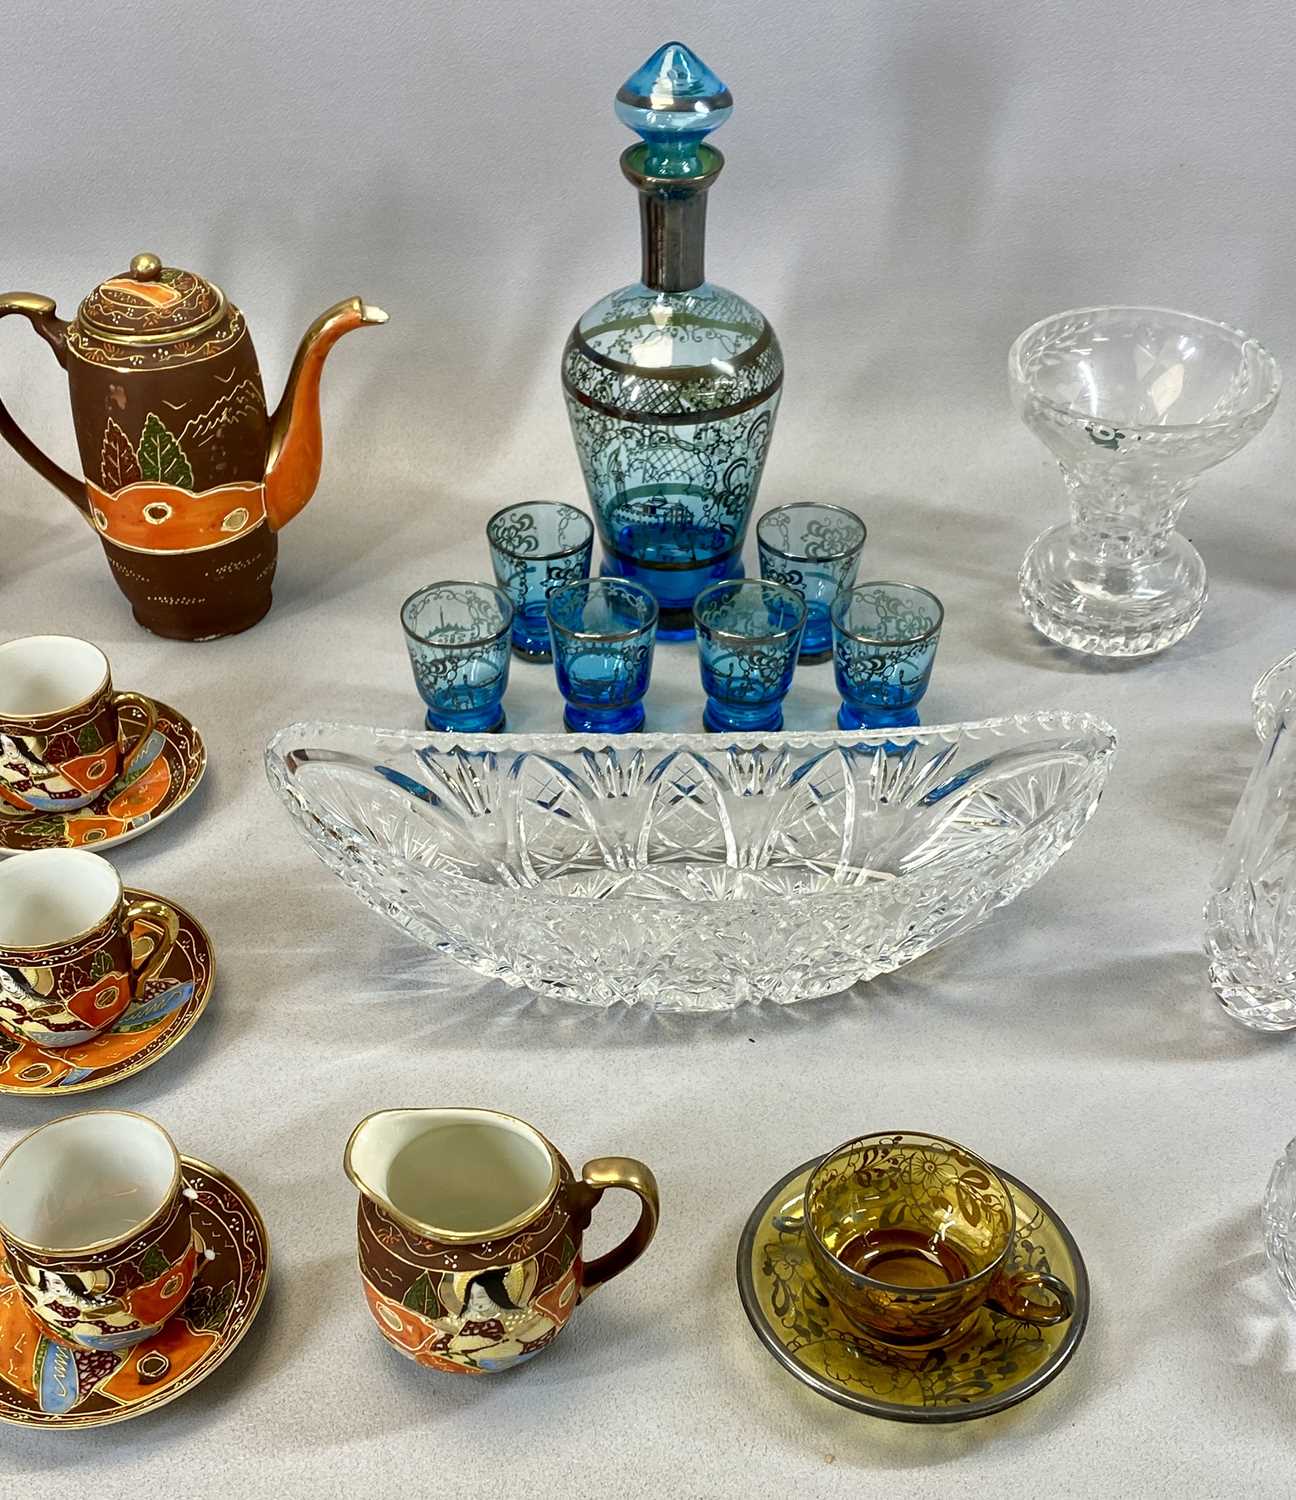 MIXED CERAMICS & GLASSWARE, including Japanese eggshell tea service, 15 pieces, a silvered blue - Image 3 of 4